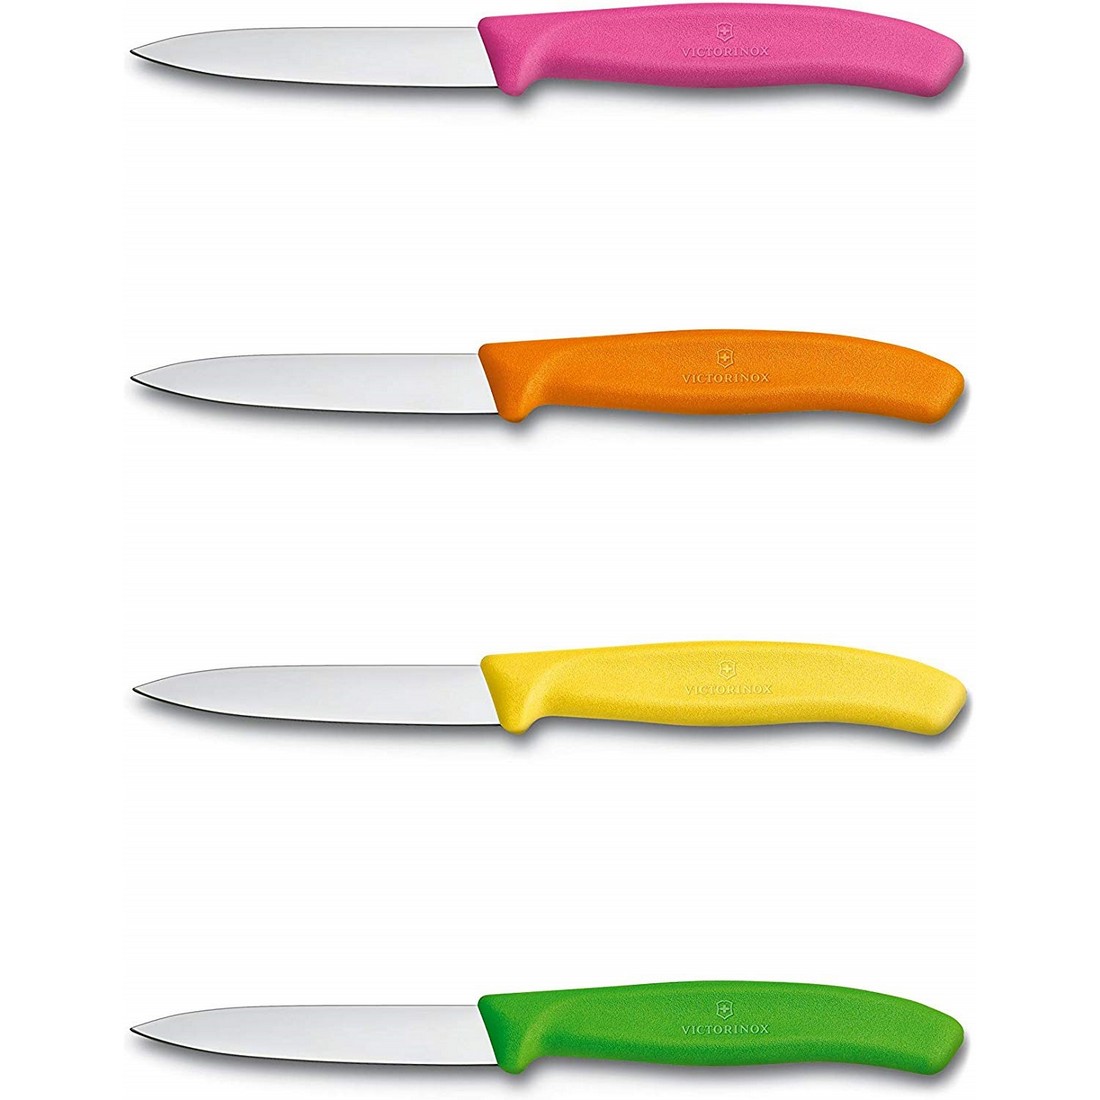 Paring knife 8 cm - Assorted Colors Yellow, Orange, Pink, Green - Special Pack of 4 Pieces